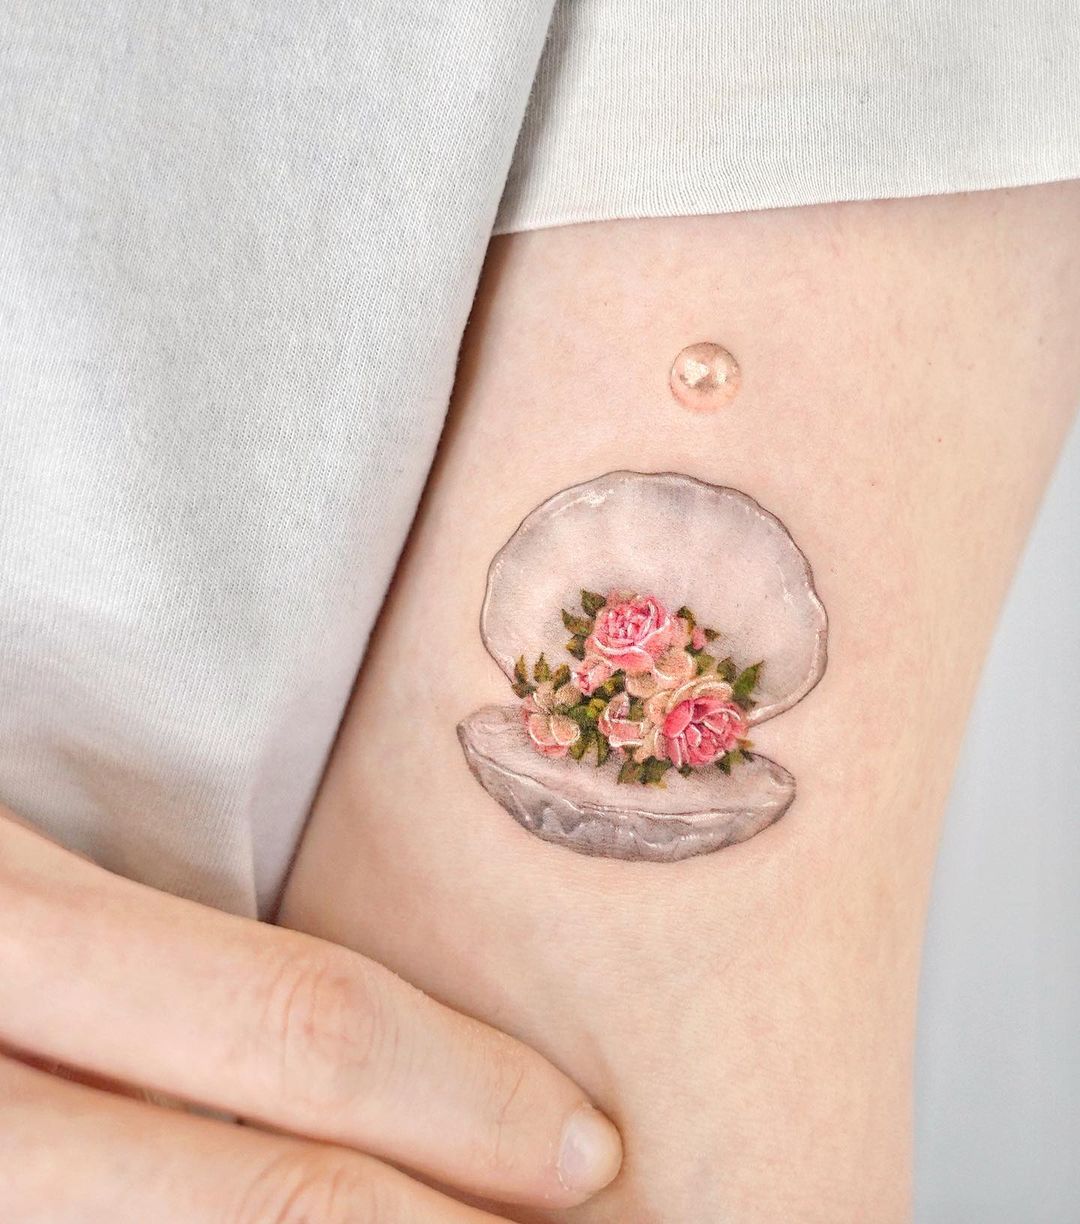 Bright floral mood in tattoos by Songe | iNKPPL